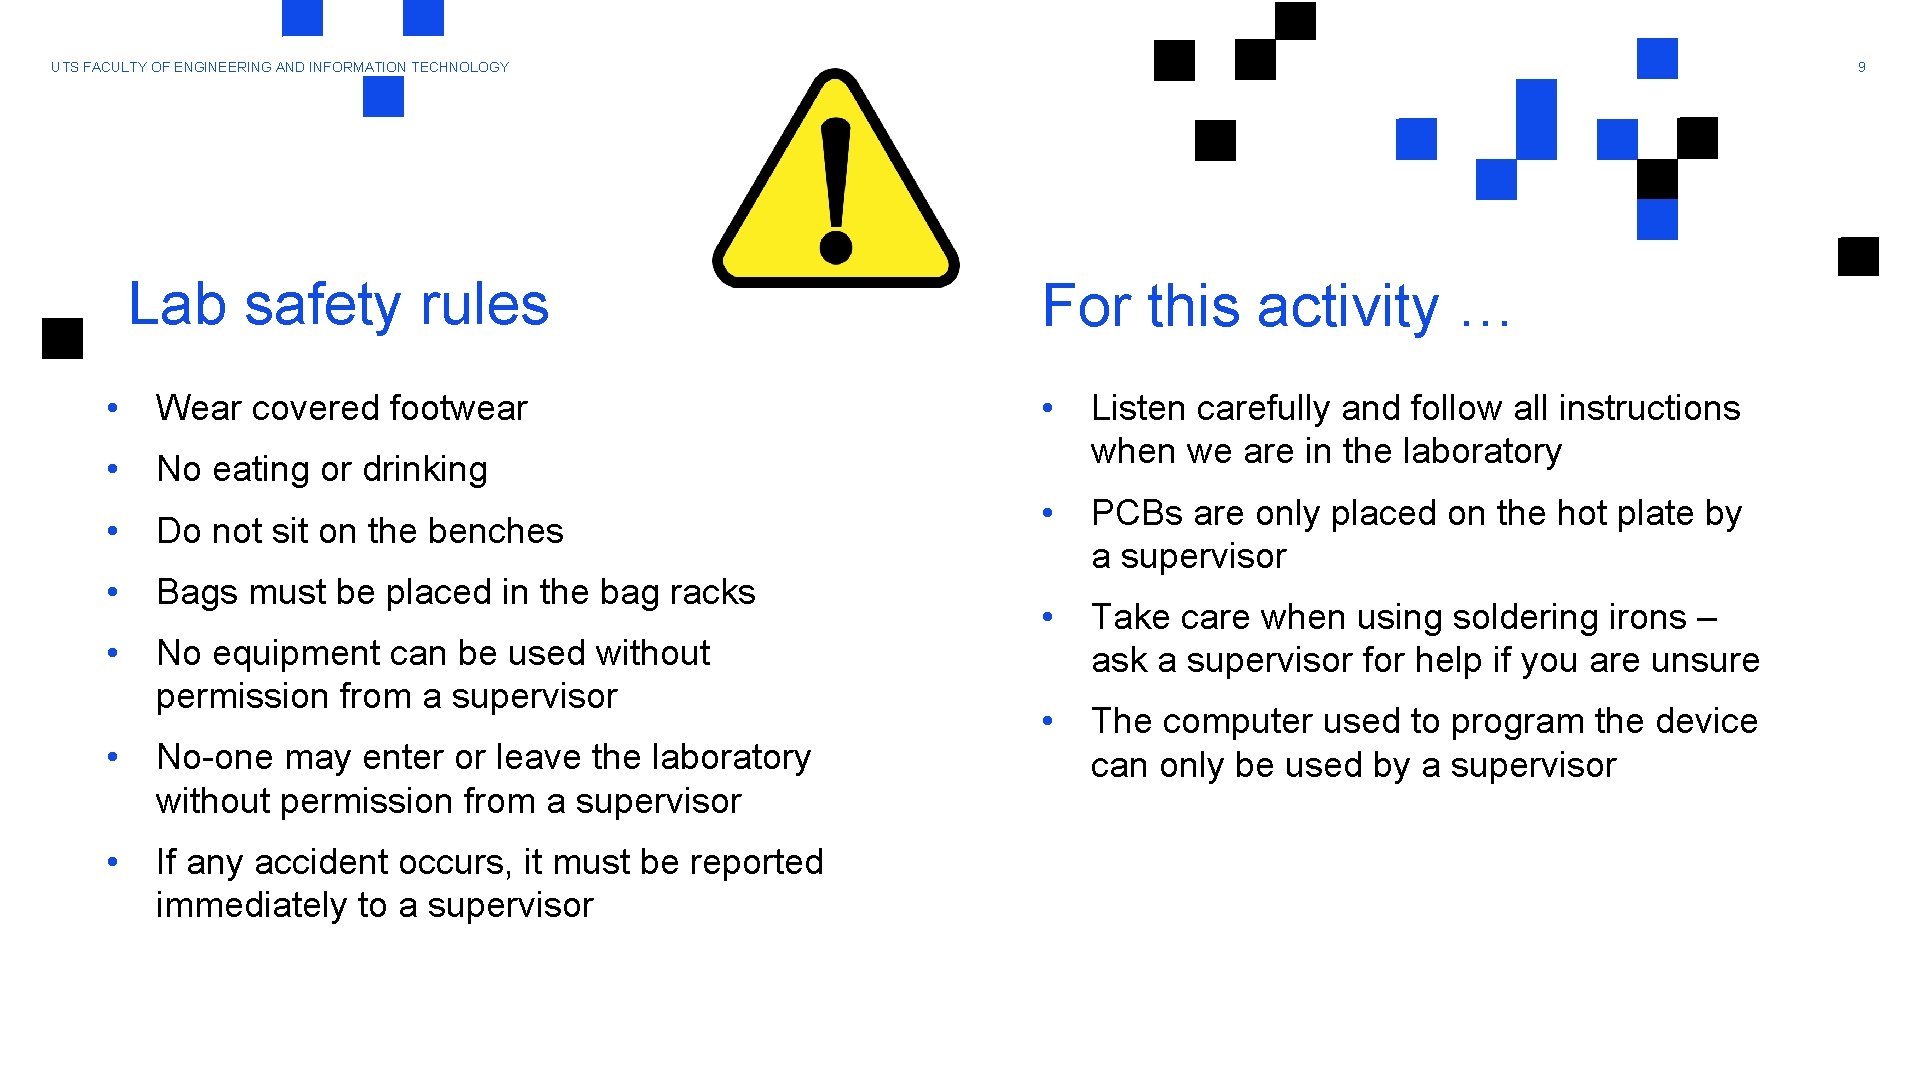 9 UTS FACULTY OF ENGINEERING AND INFORMATION TECHNOLOGY Lab safety rules • Wear covered